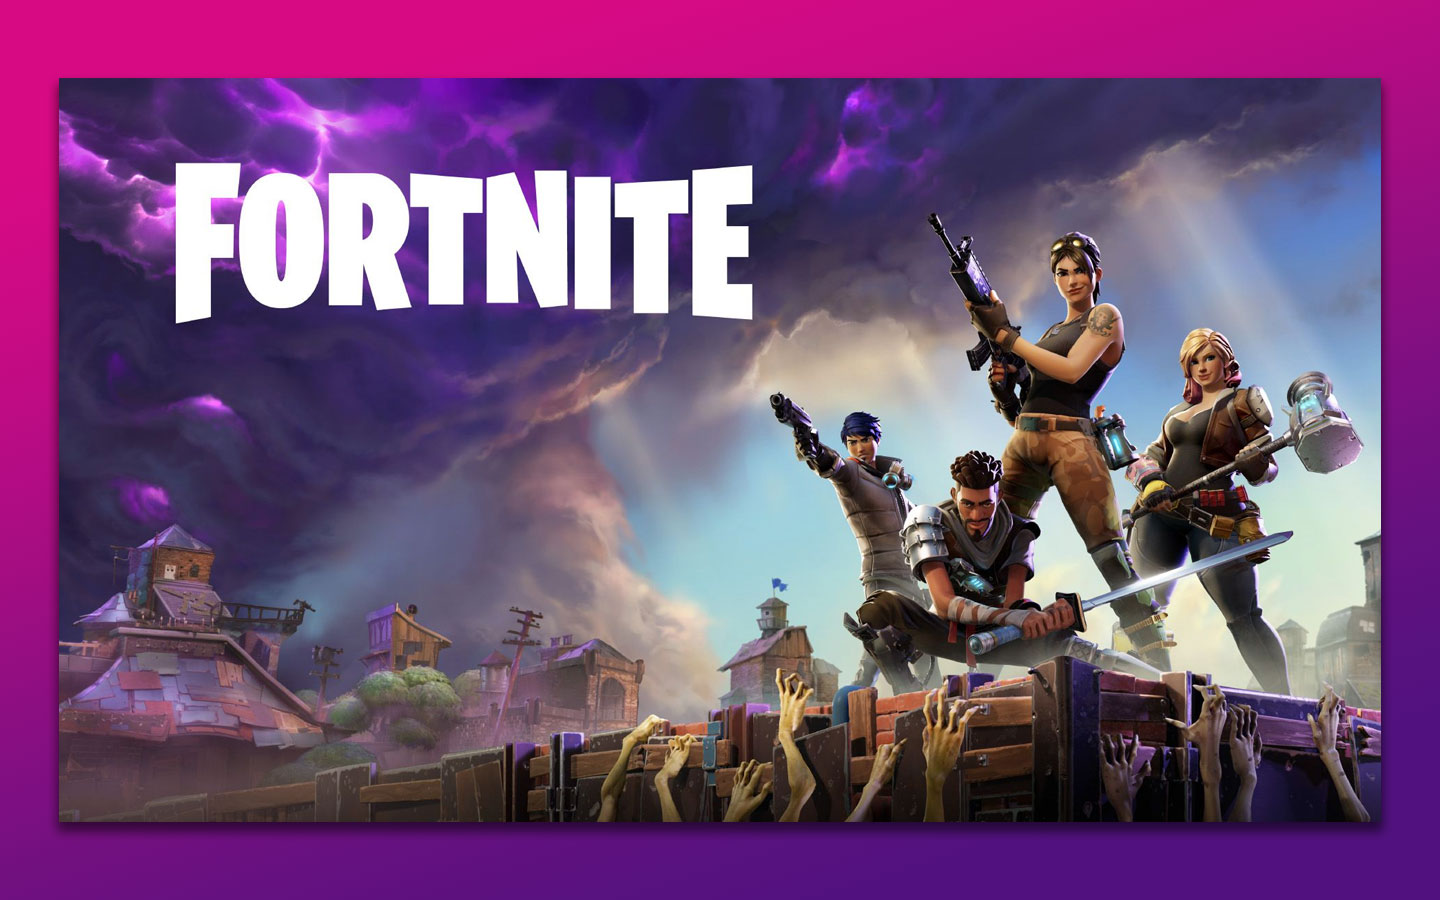 Fortnite Game Can Play PS4 And Xbox Together